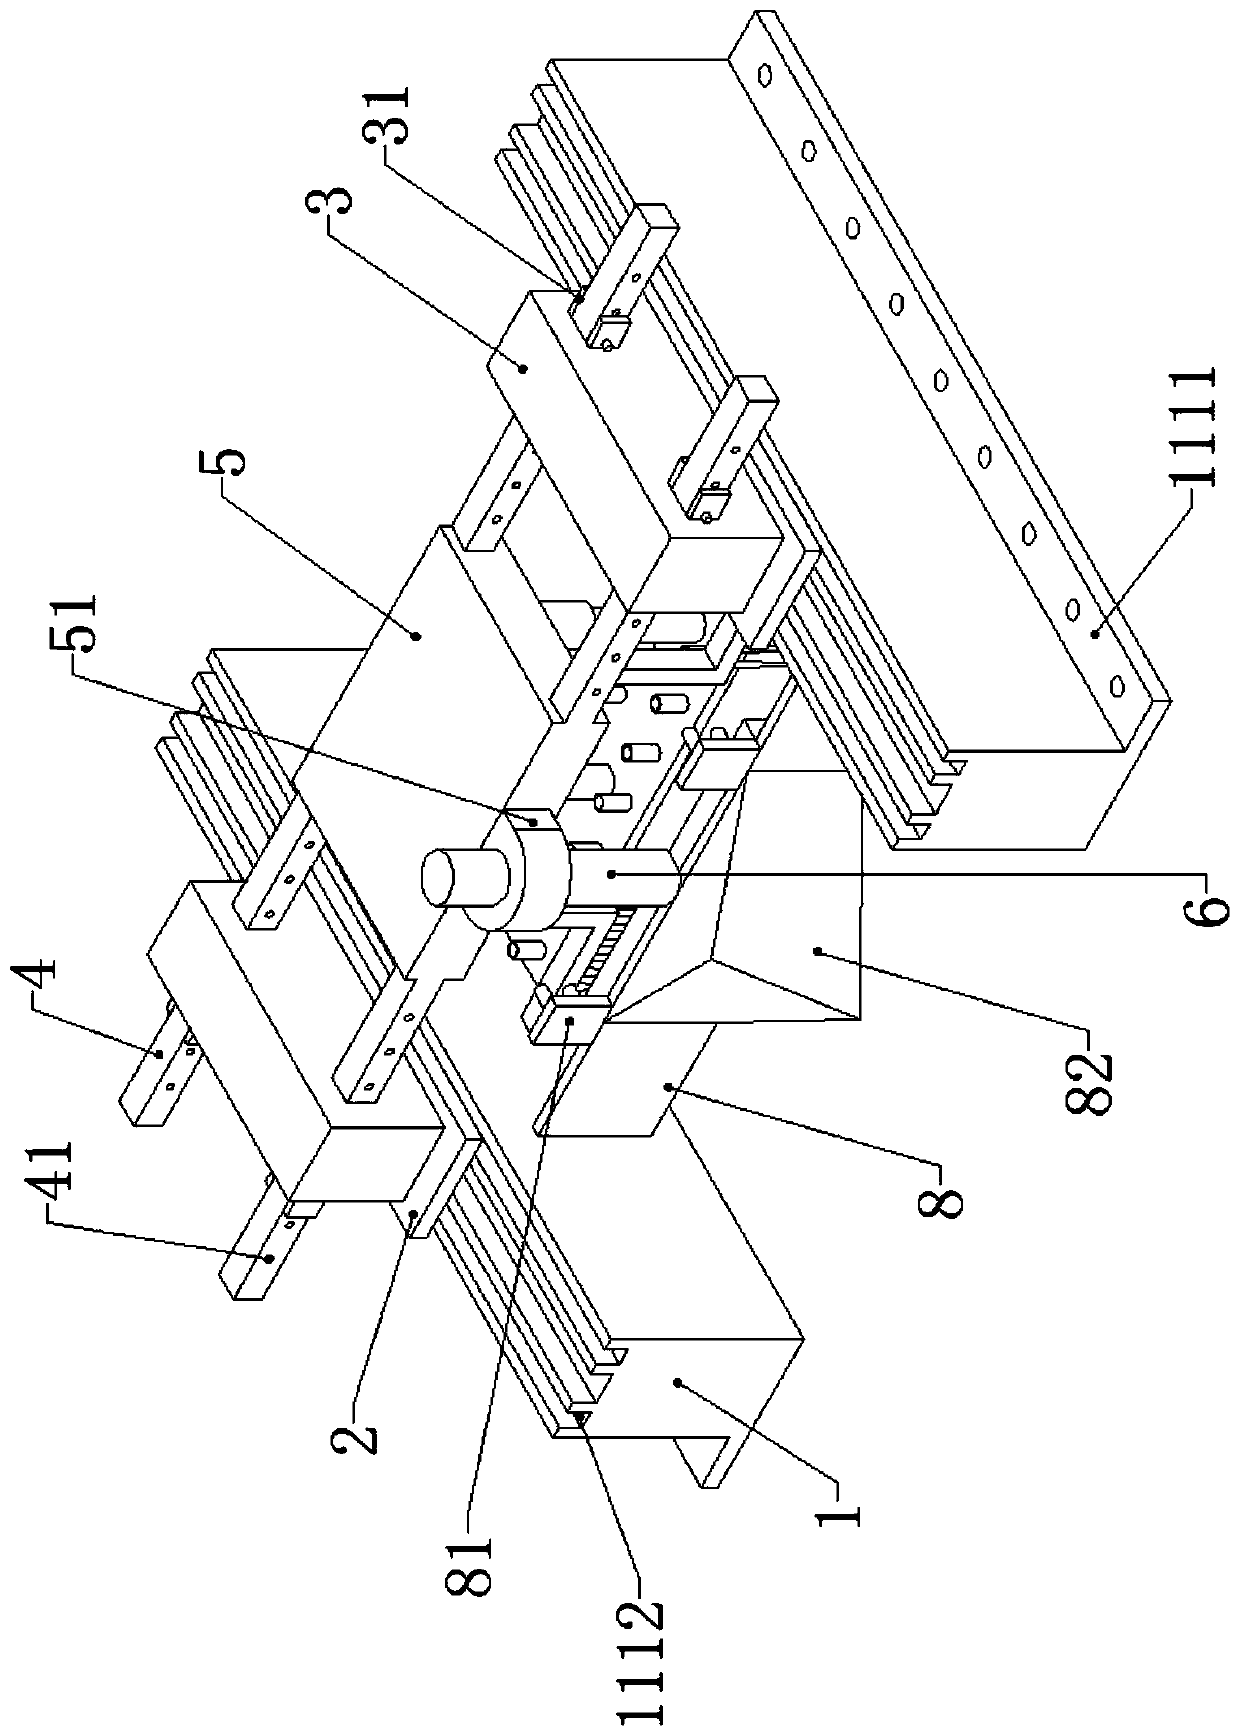 Pavement cement paving device for road and bridge construction